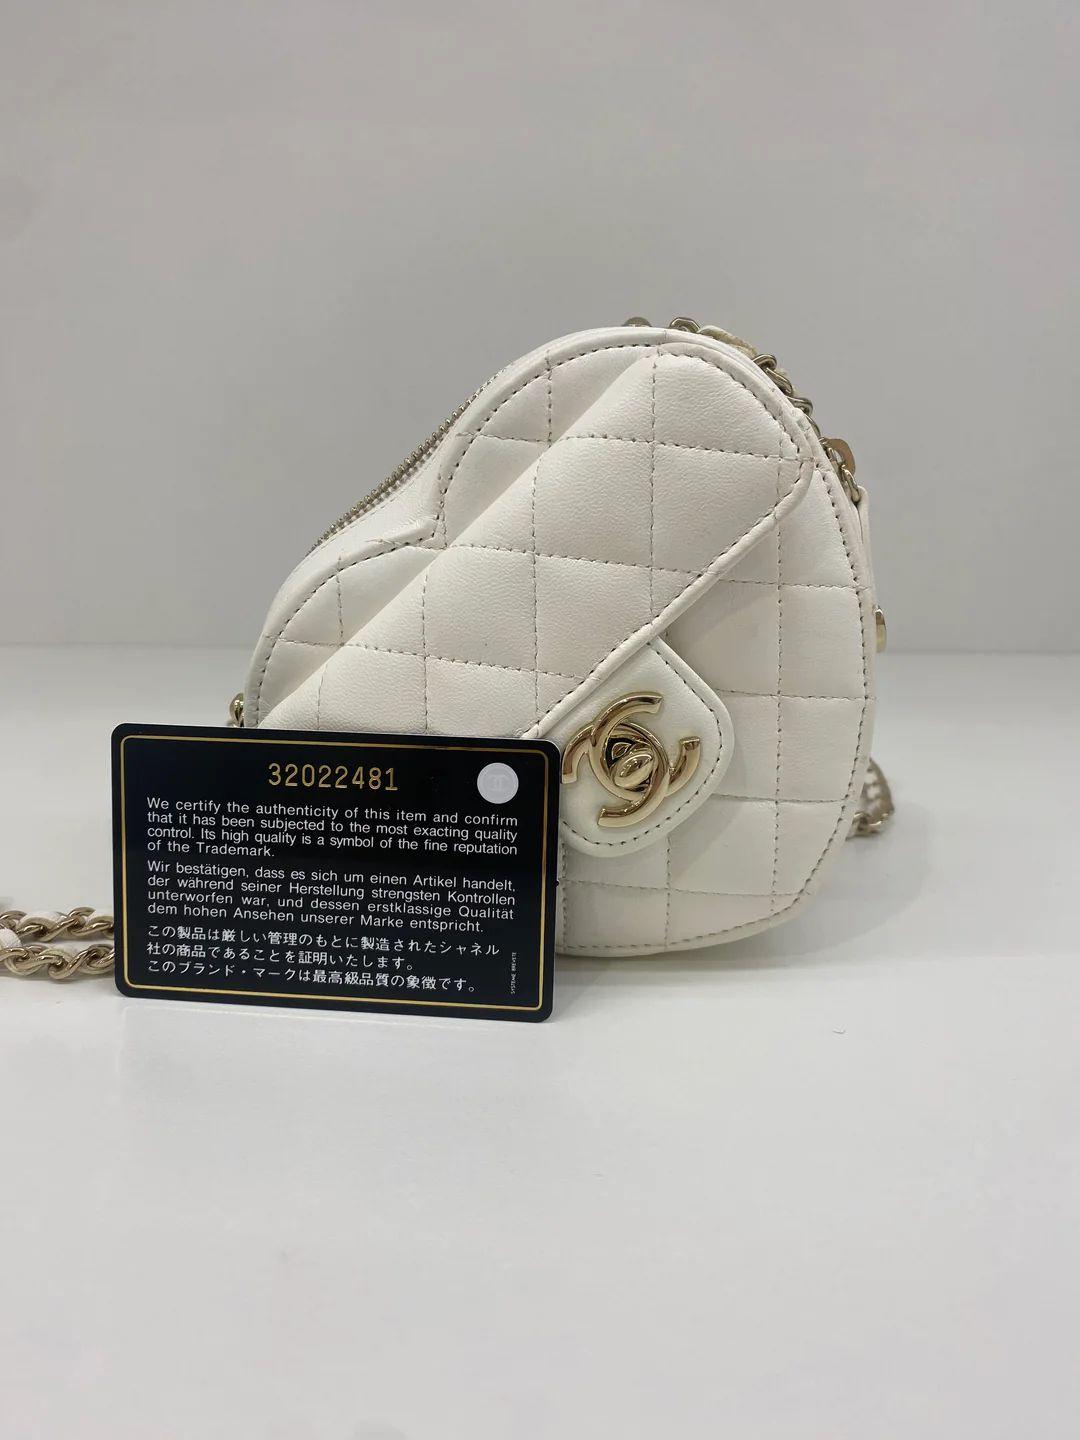 Condition: Like New 

Colour: White

Leather: Lambskin leather

Hardware Colour: Gold Tone

 Year: 2021

Inclusion: Full set, no receipt 

Origin: France

Authenticity: Authenticity Guaranteed or fully refundable

Shipping: Express Shipping Domestic